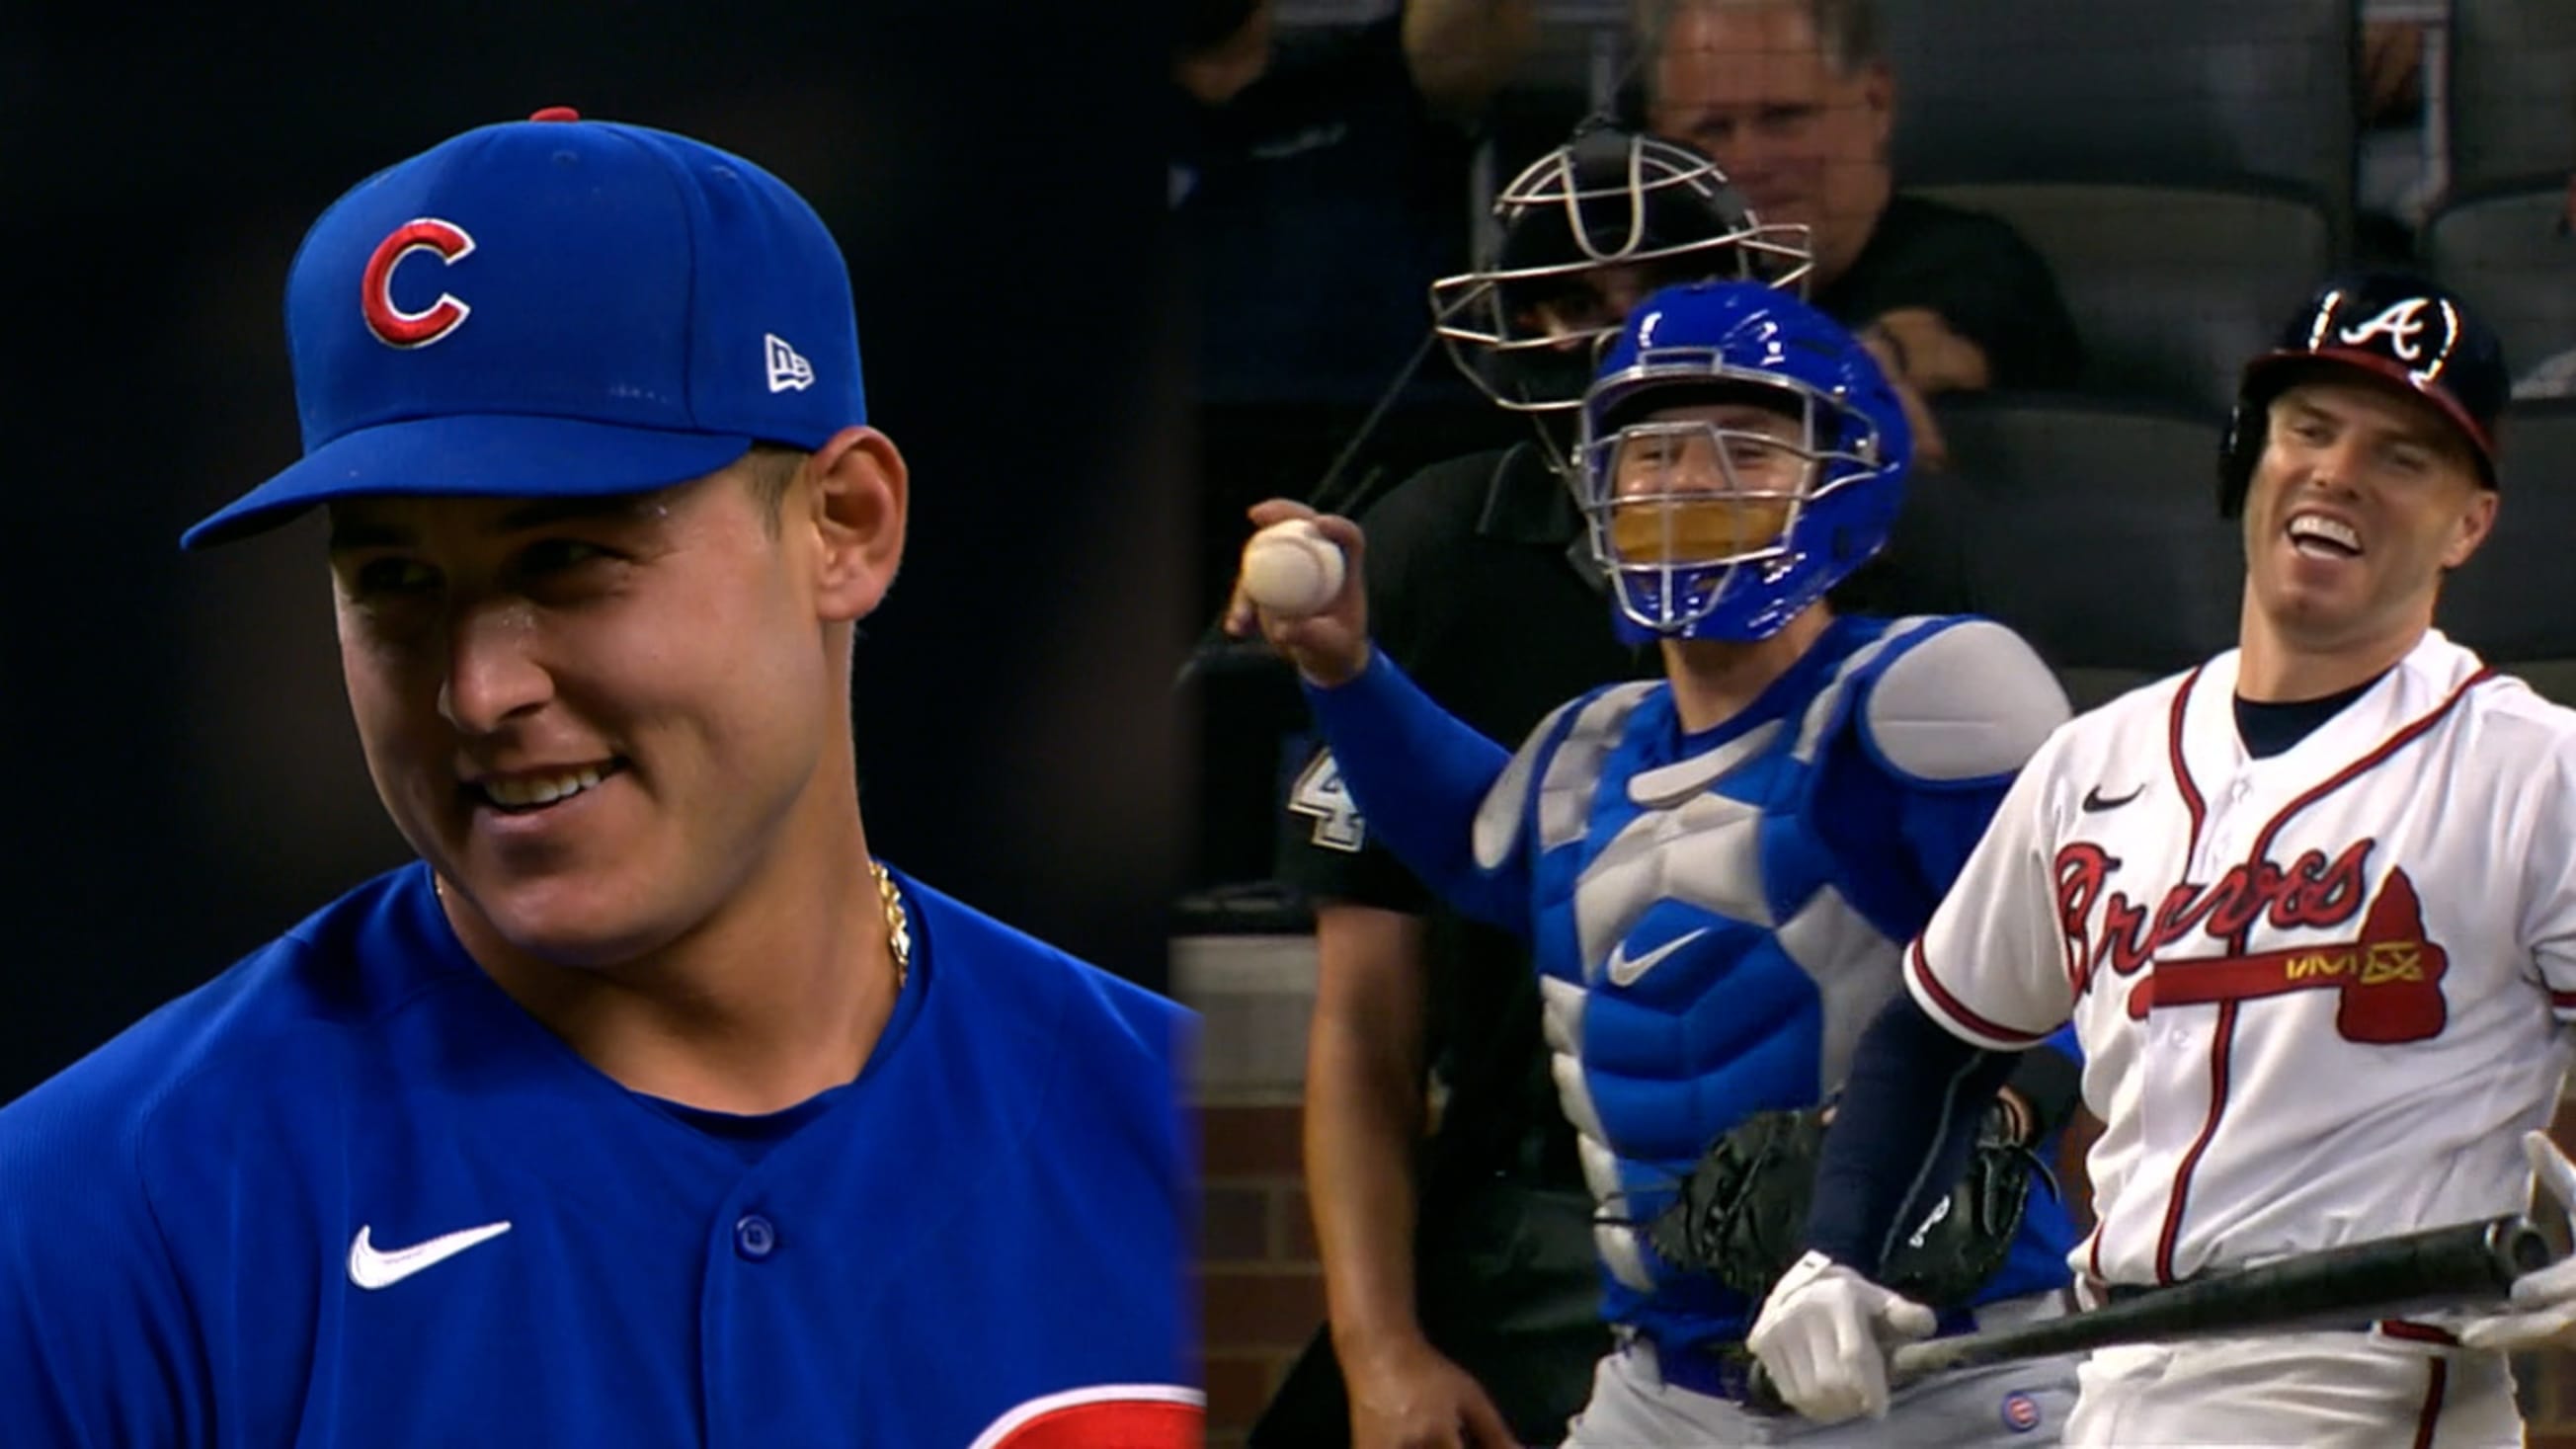 Cubs' Rizzo gets a good laugh after striking out Freeman, Taiwan News